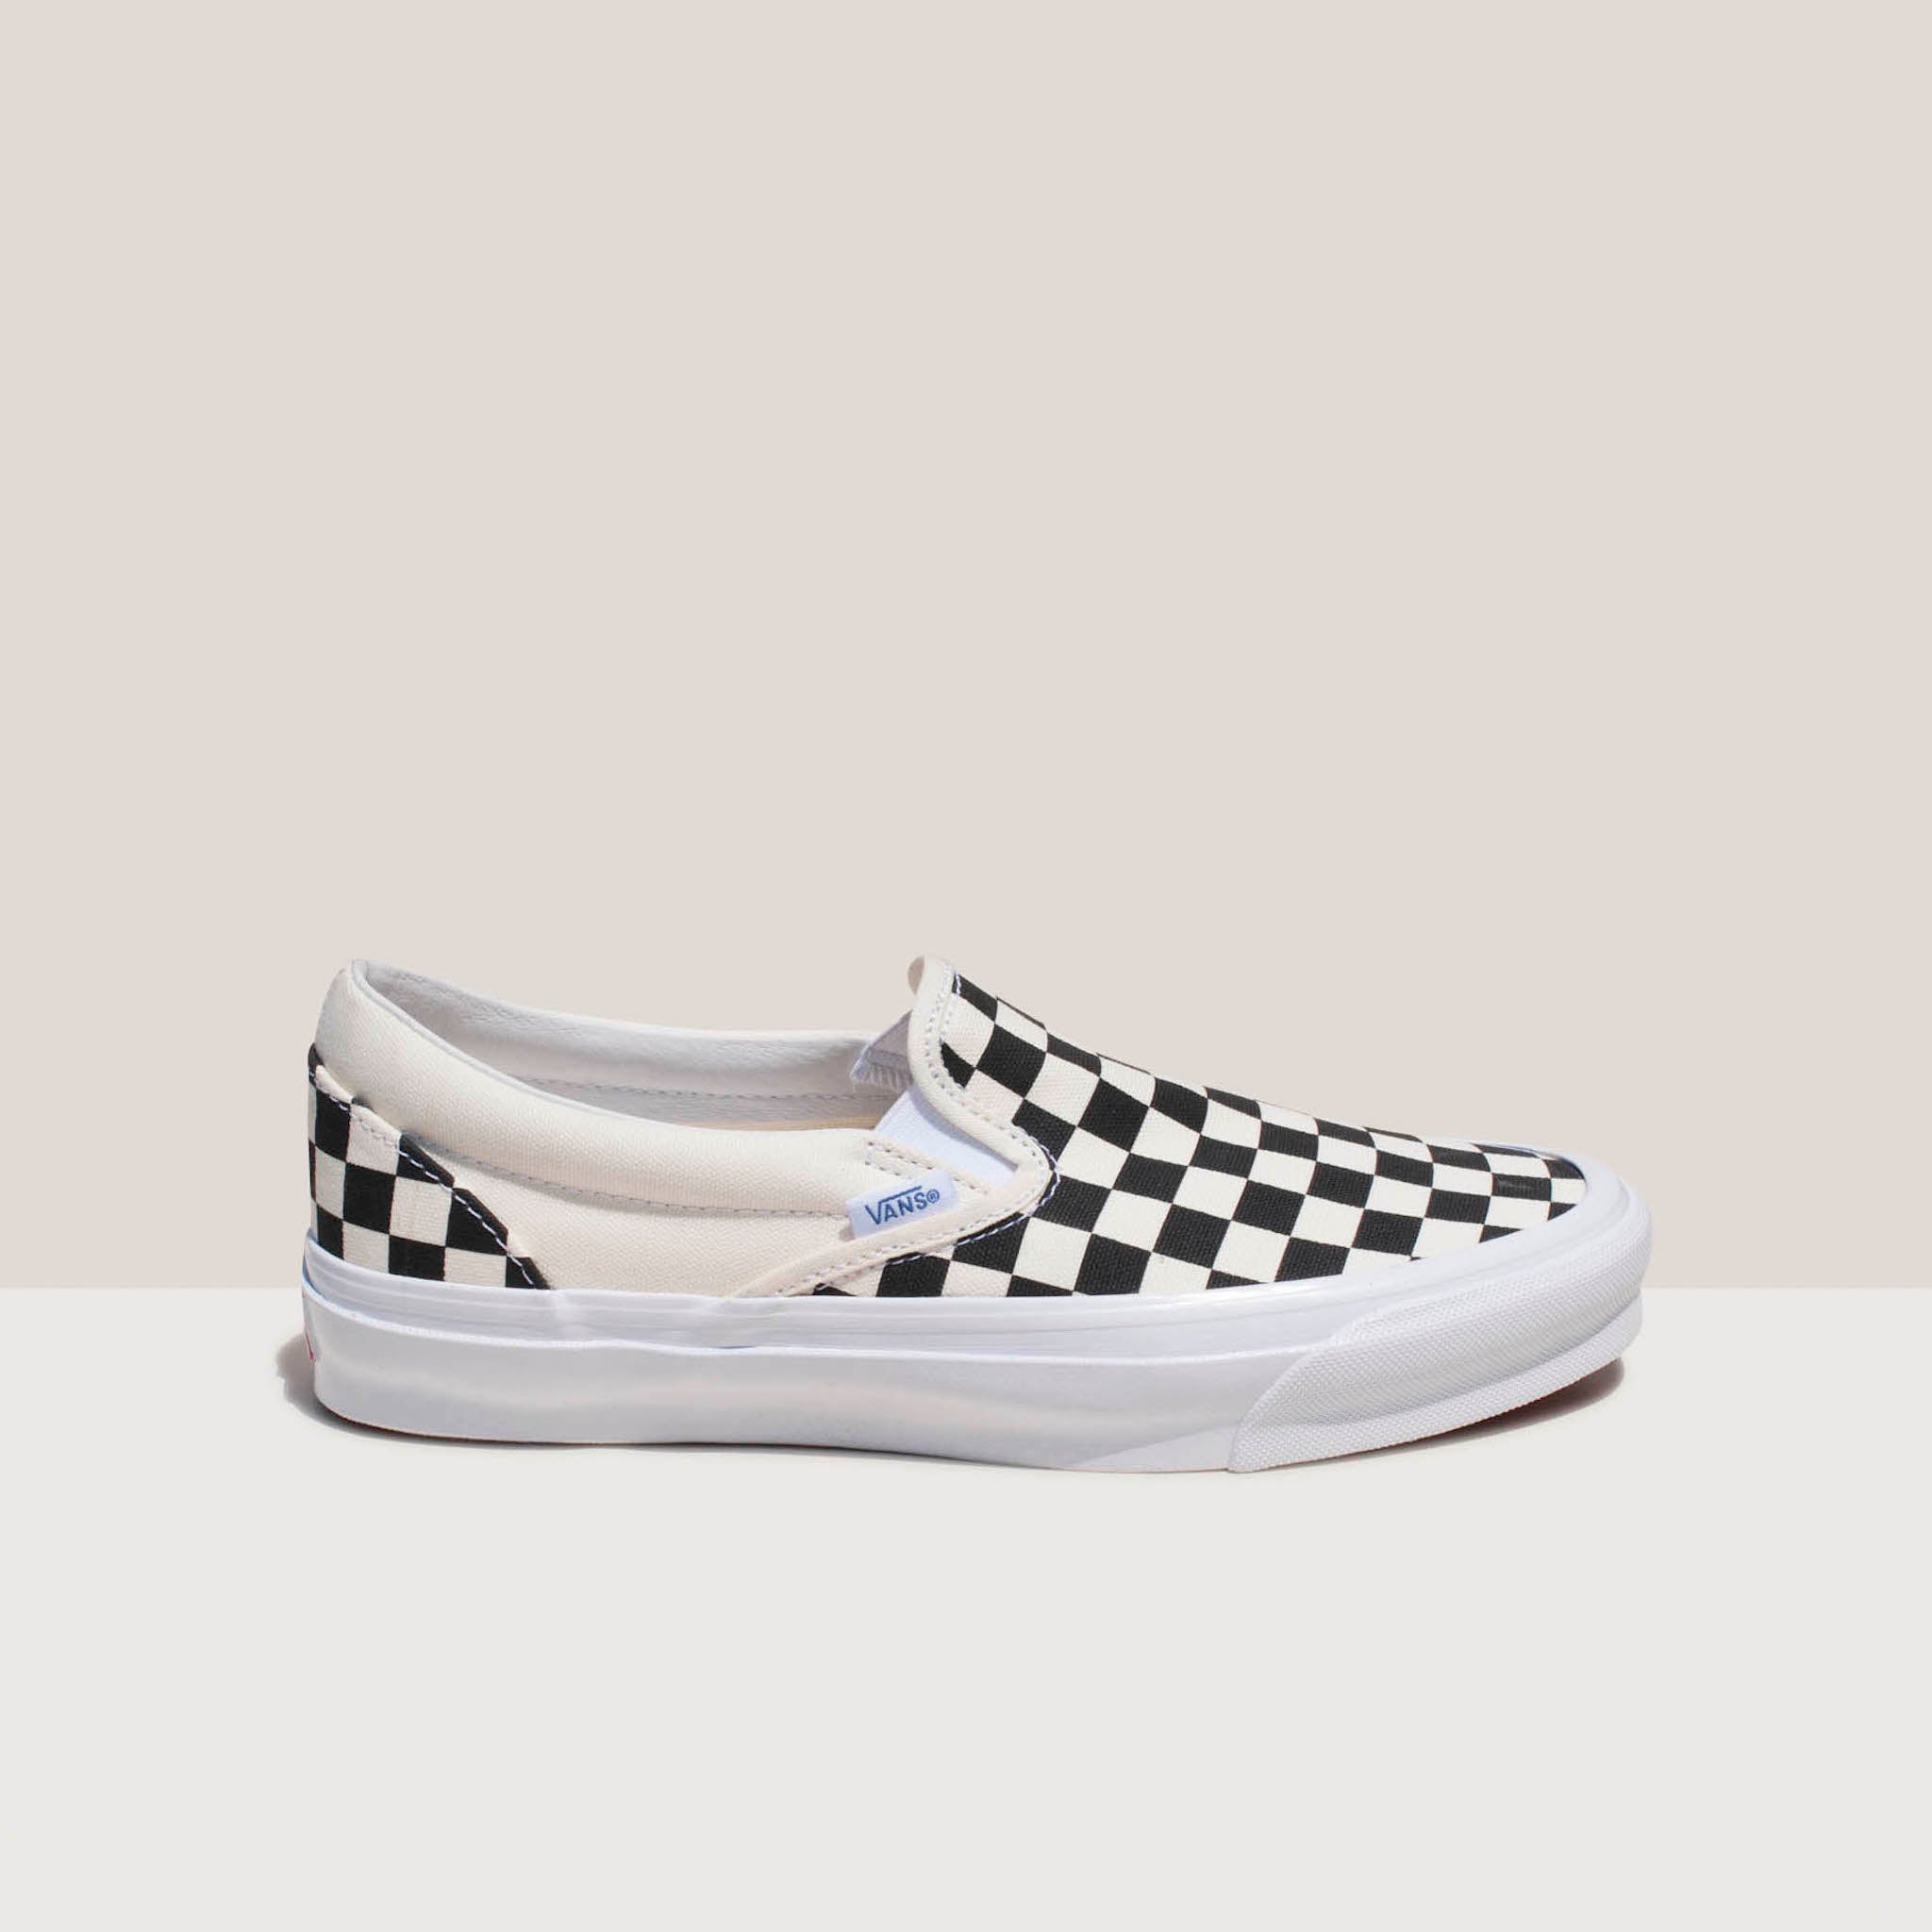 OG Classic Slip-On - Checkerboard, side view available at LCD.